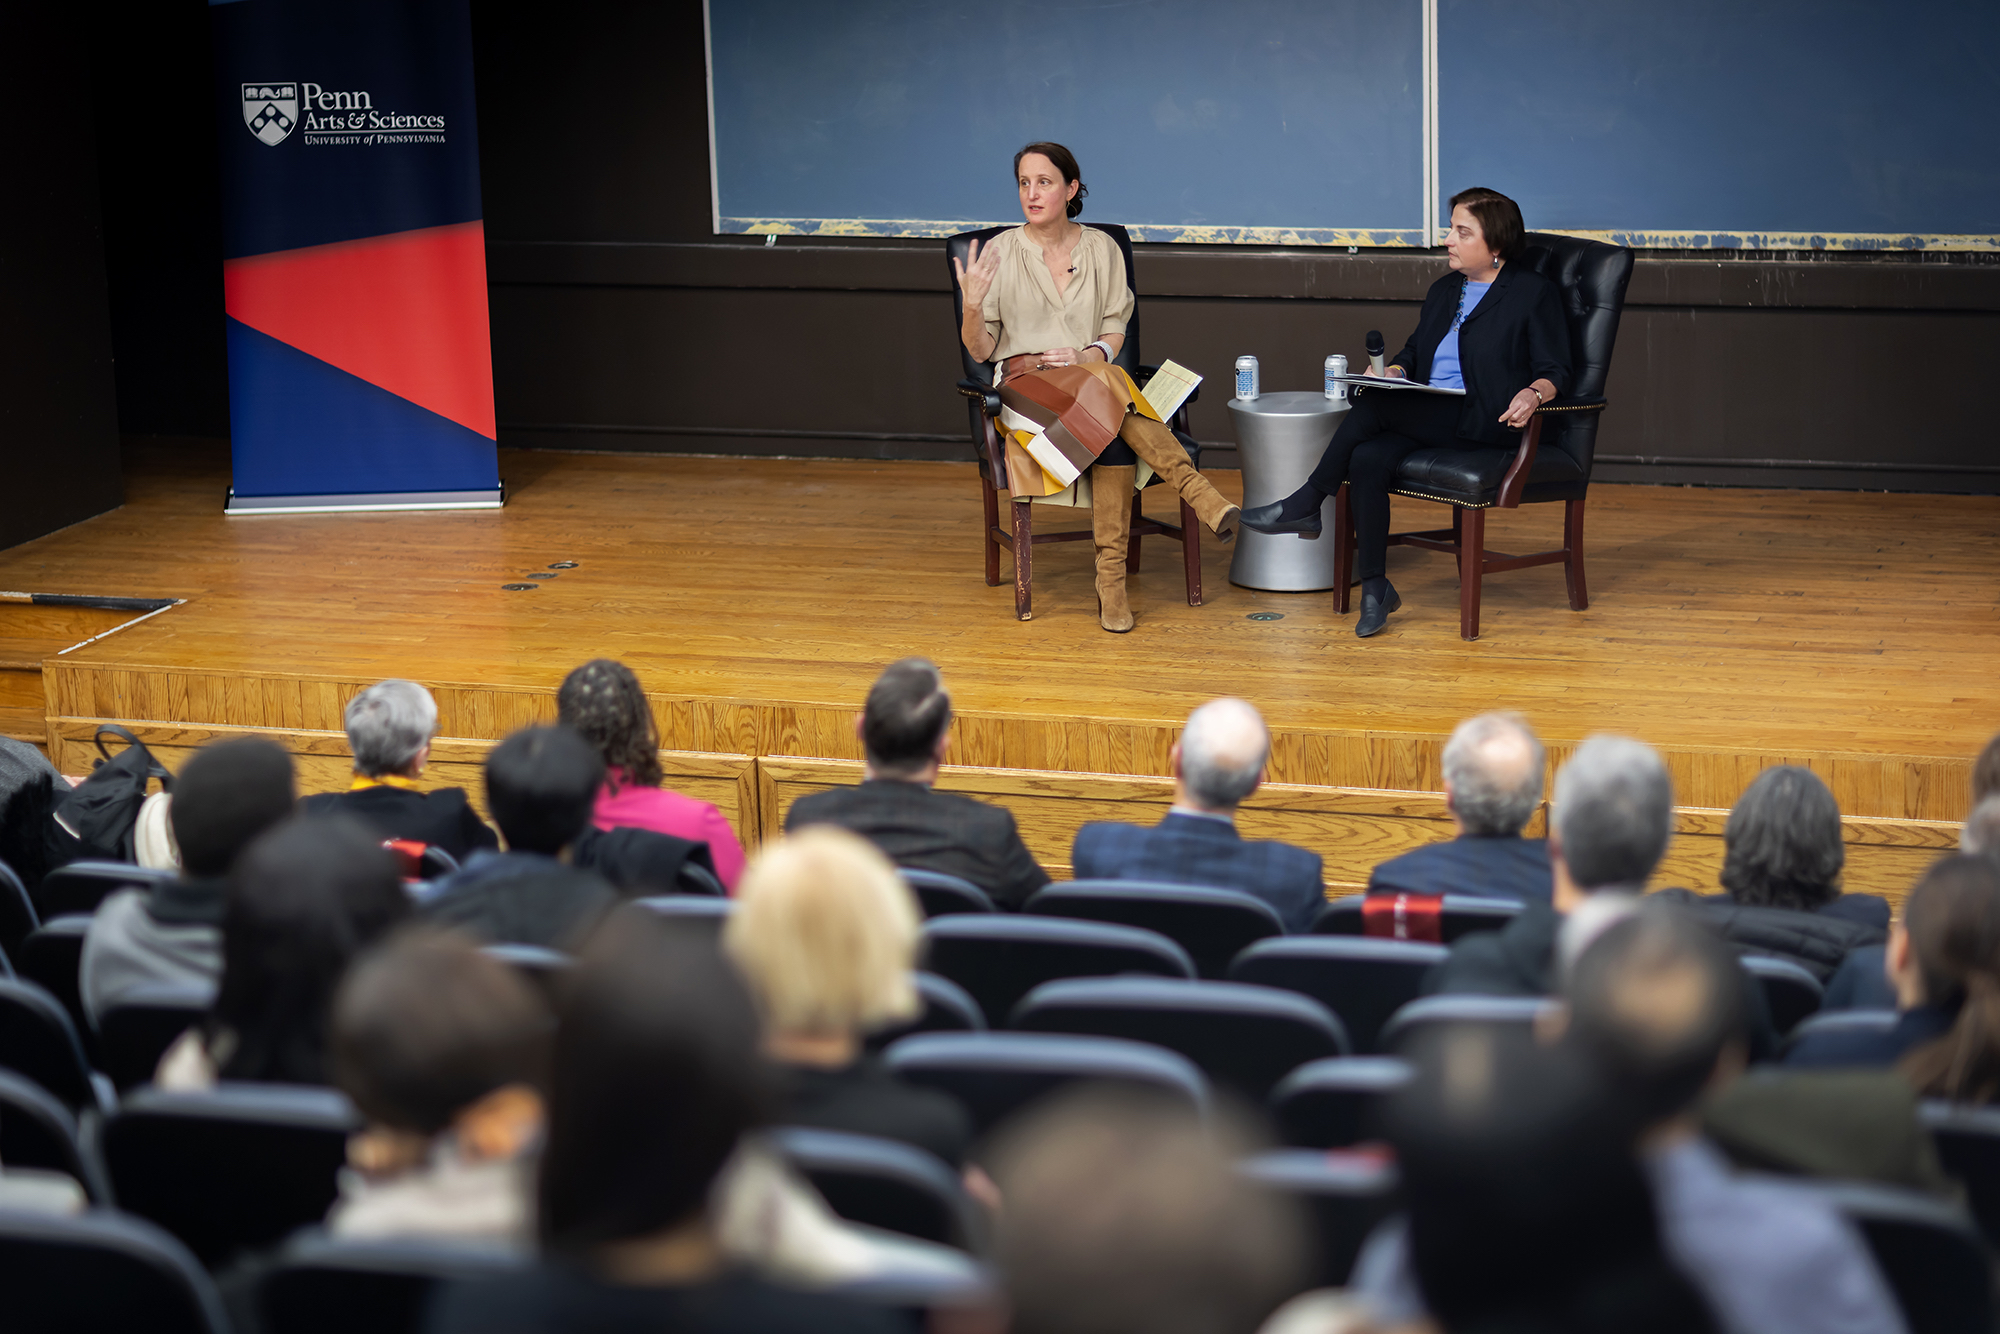 The talk about talking; Penn’s discussion of “free speech”